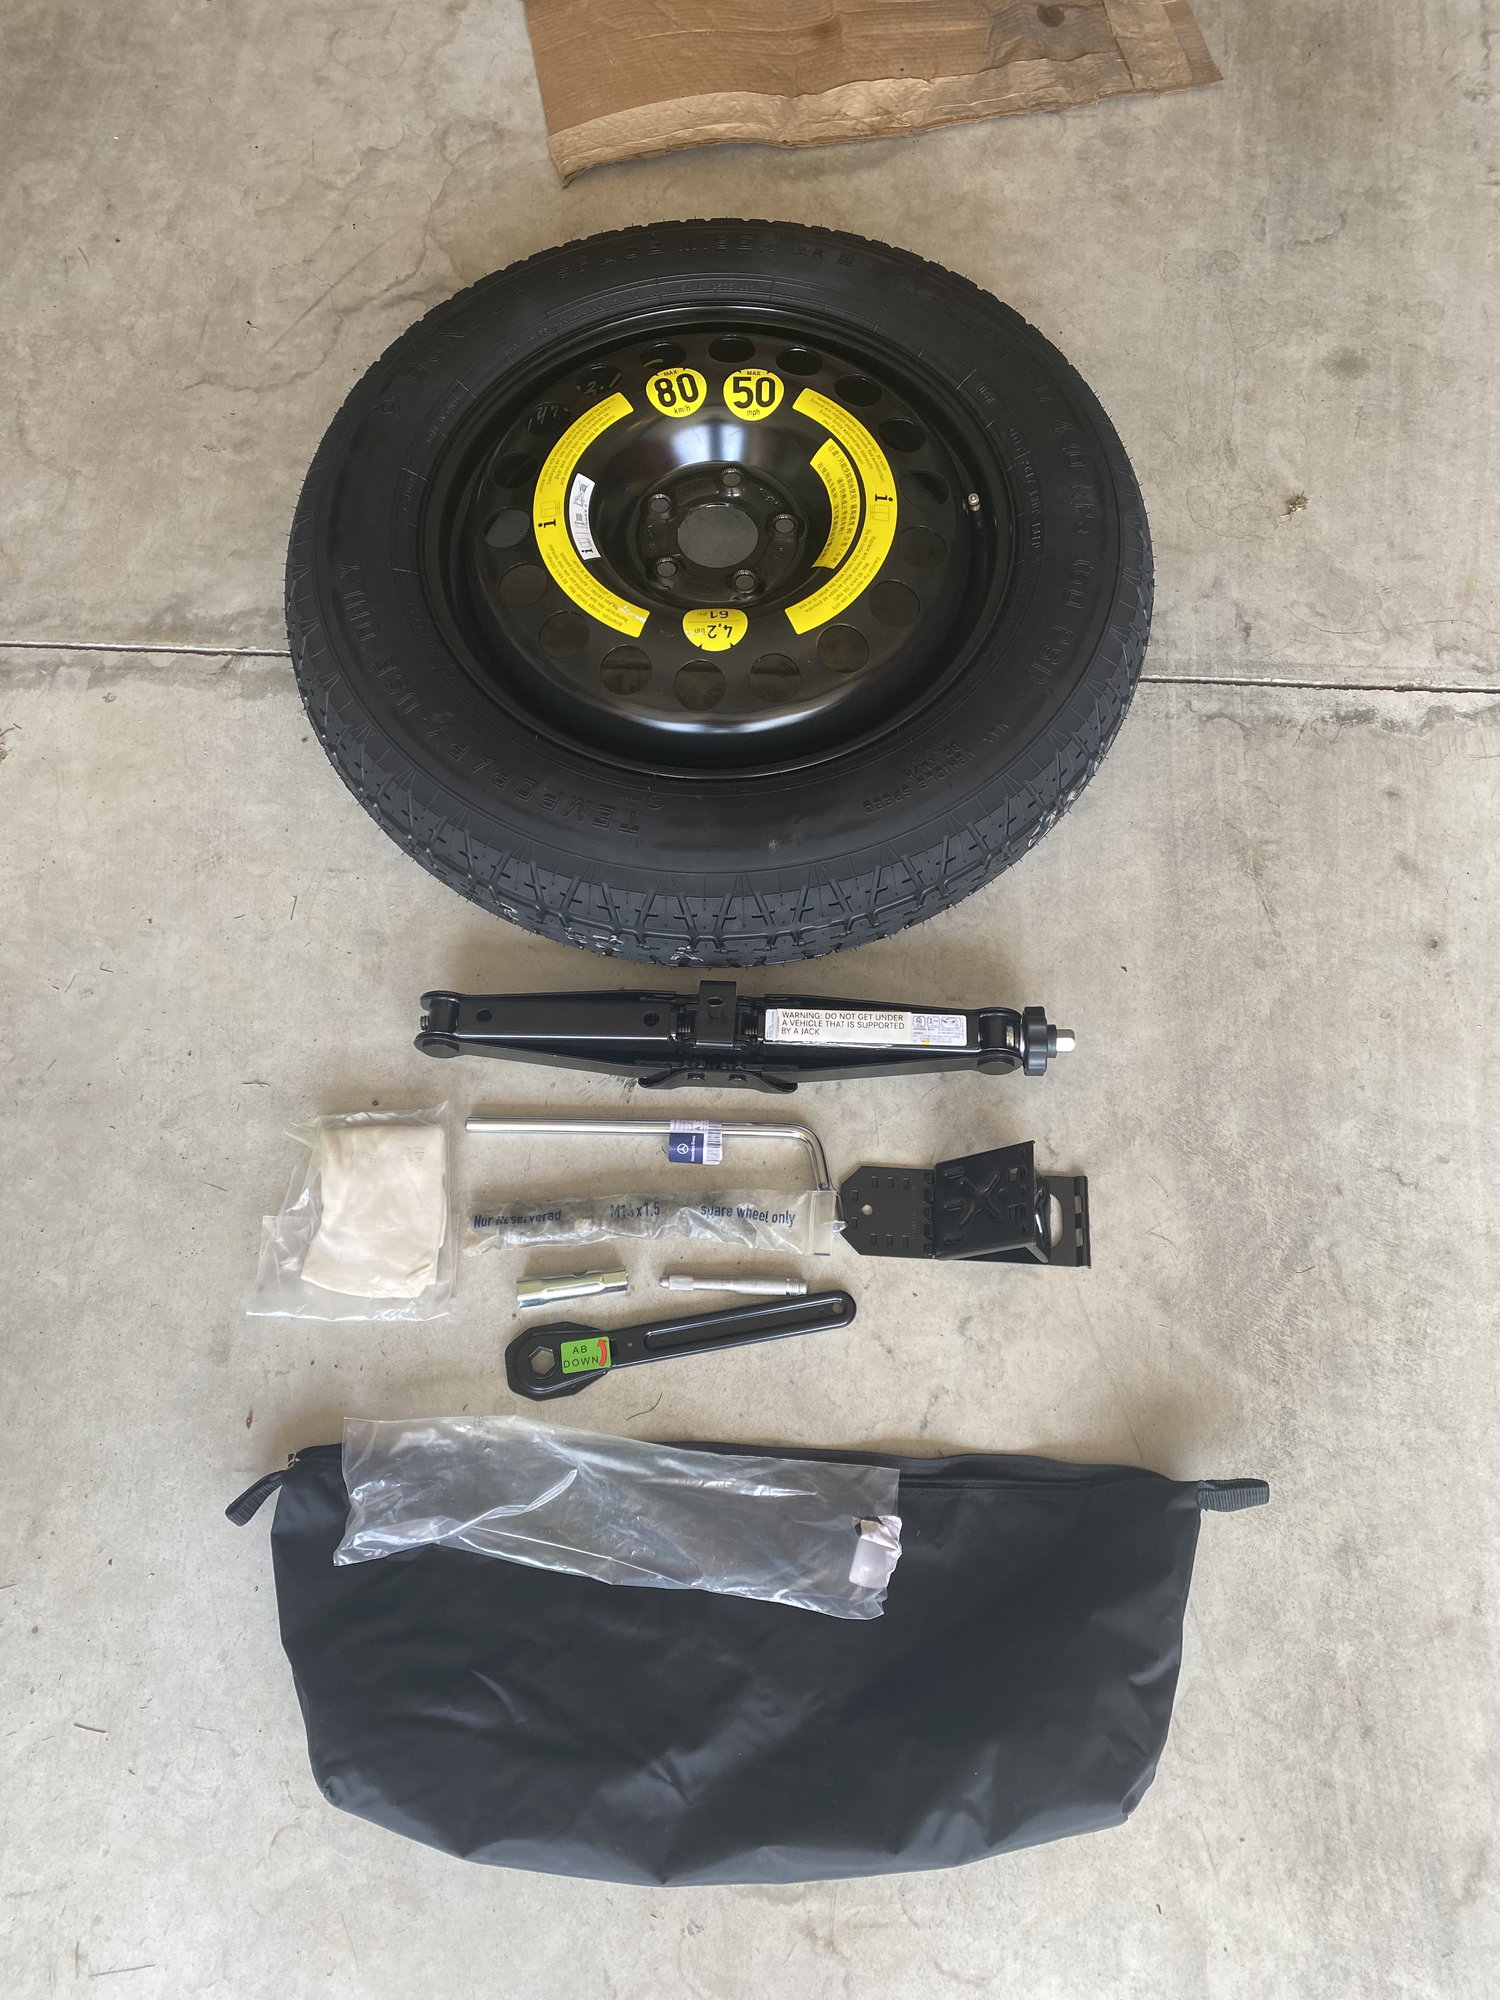 Wheels and Tires/Axles - Mercedes GLC 300 suv  spare tire kit     New Jack kit with unused 18 inch ML350 spare - New - Carlisle, PA 17015, United States